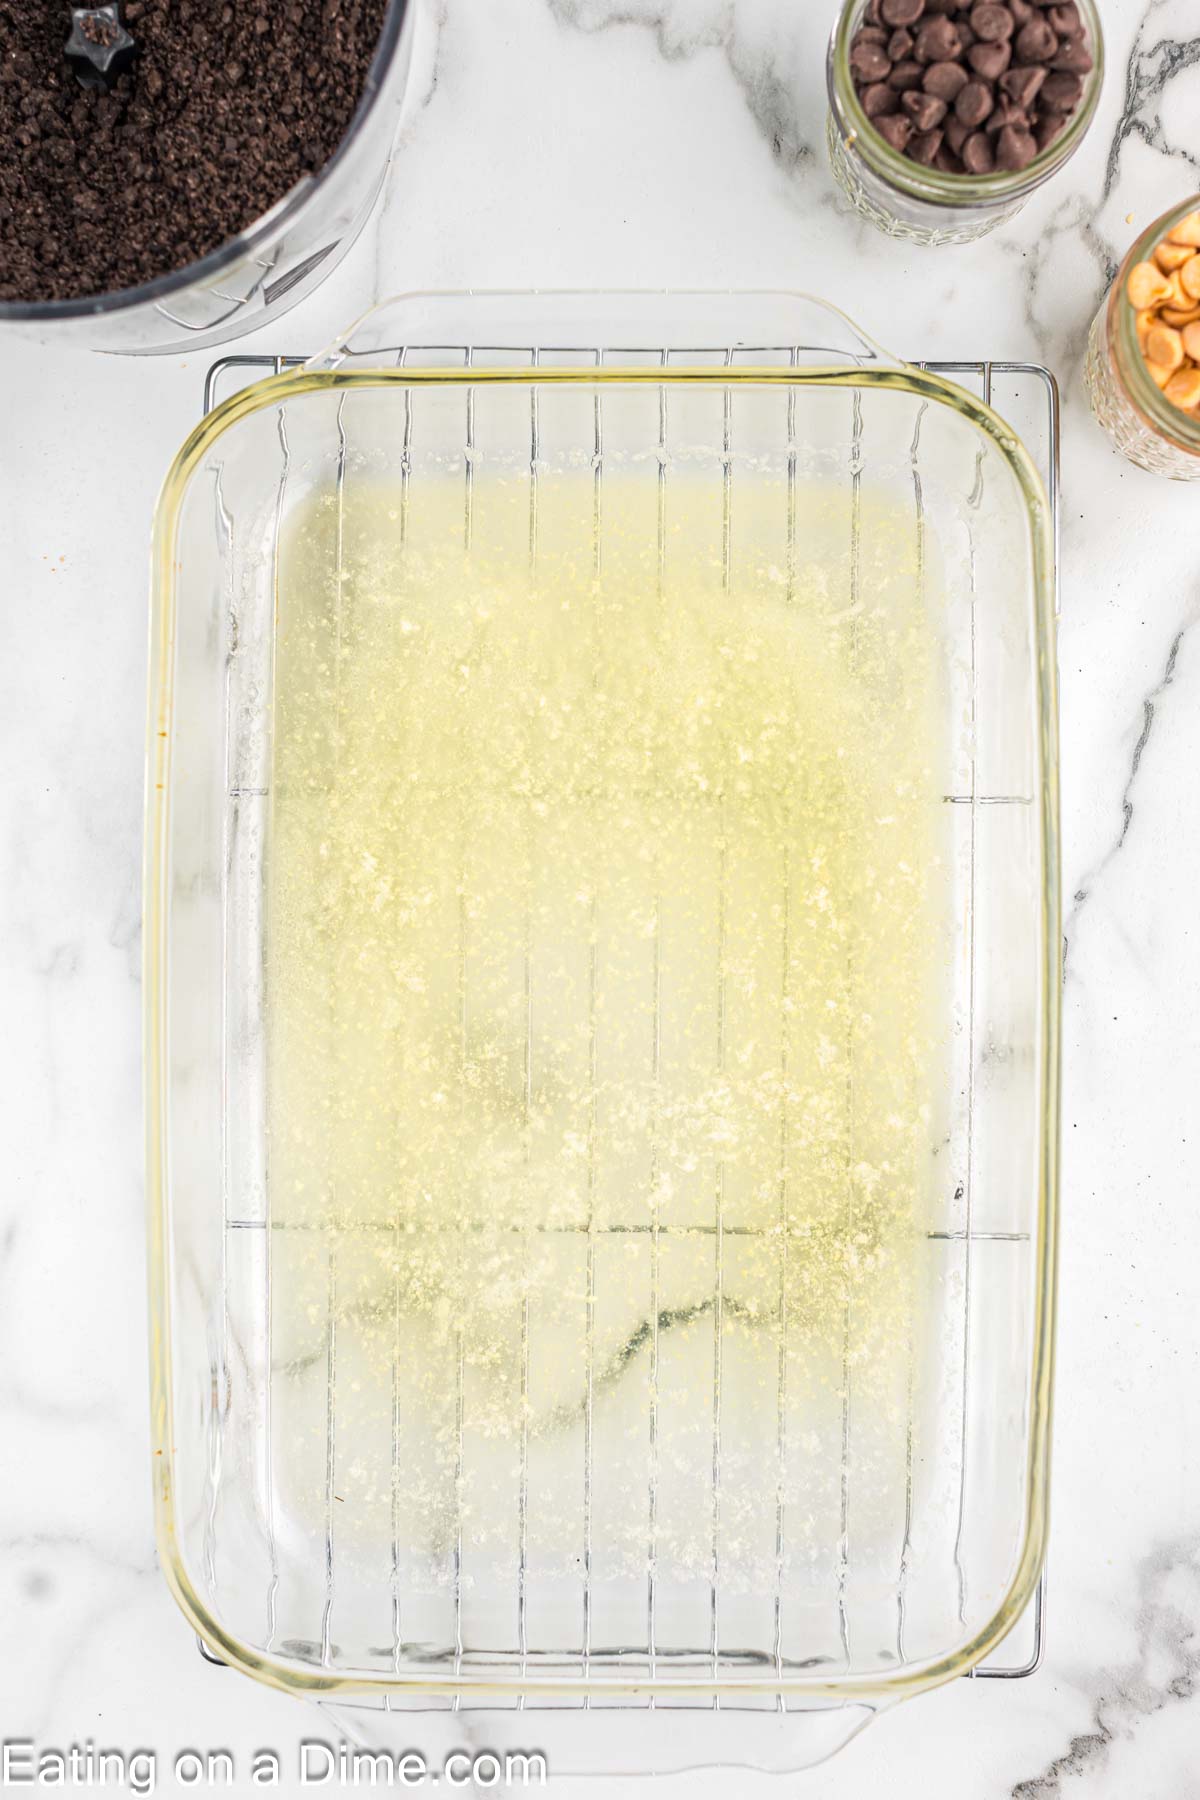 Melting butter in a baking dish